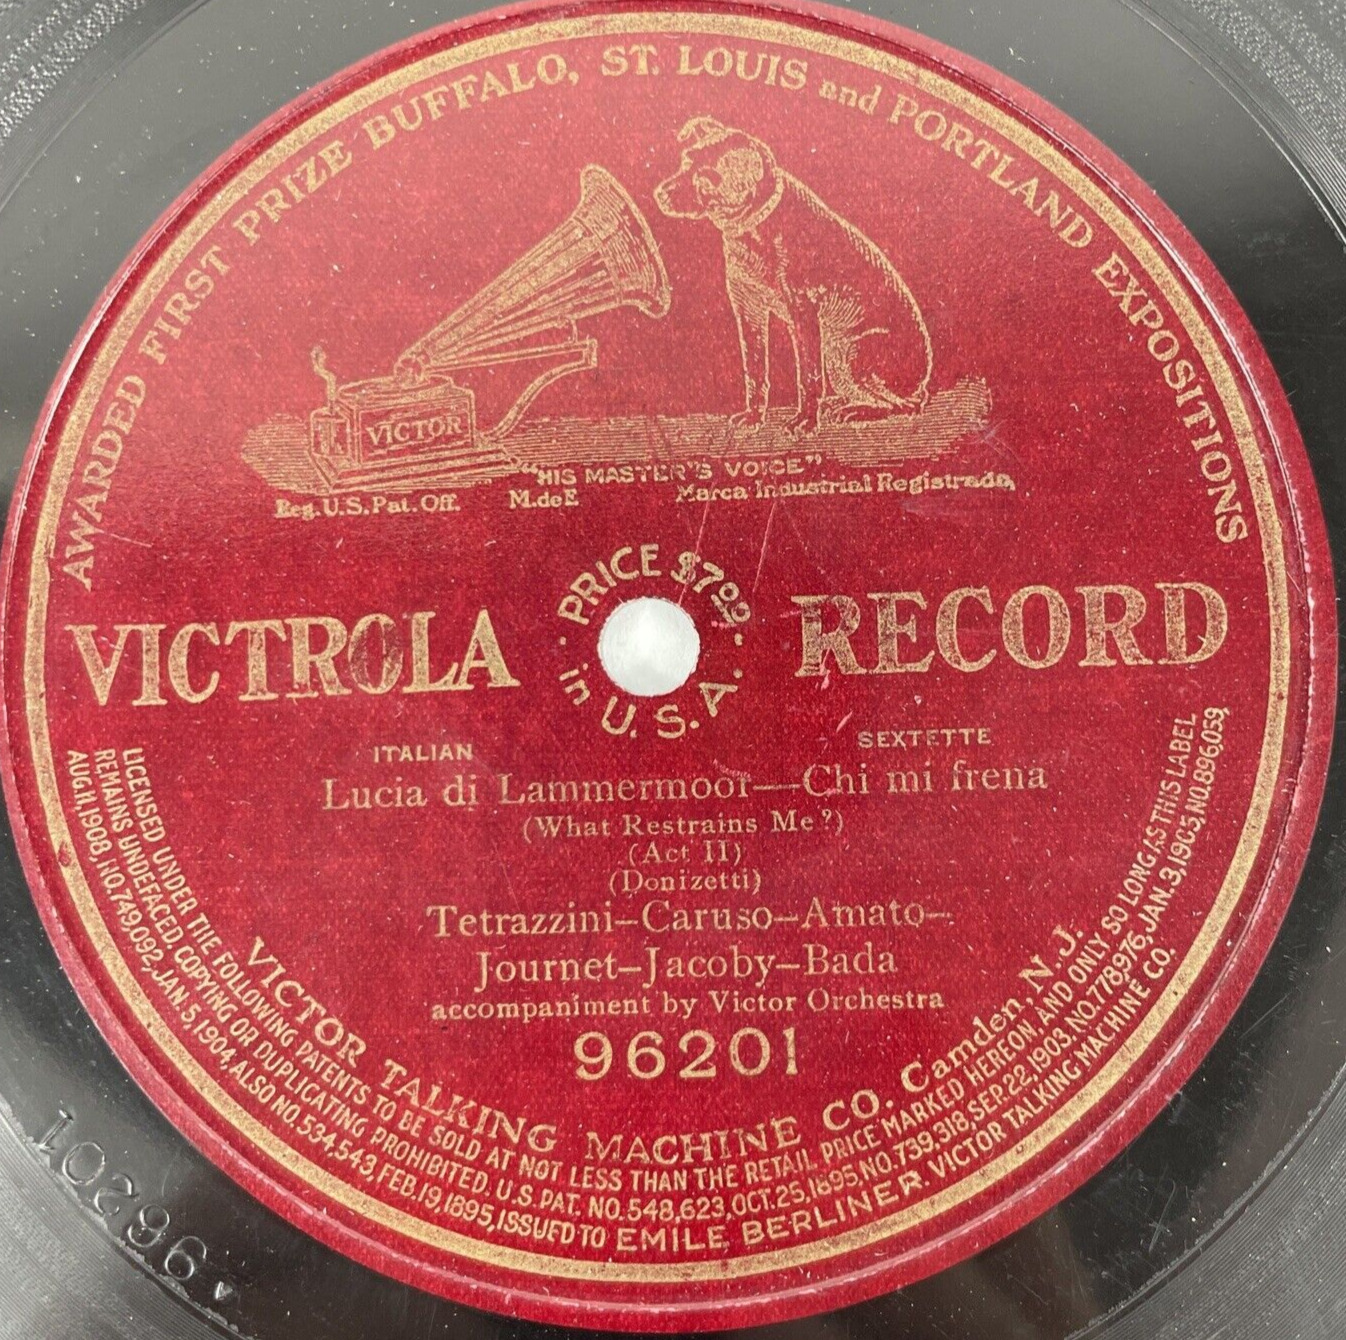 Rare Vintage: What Restrains Me by Donizetti 10” Vinyl Record Victrola Red 96201